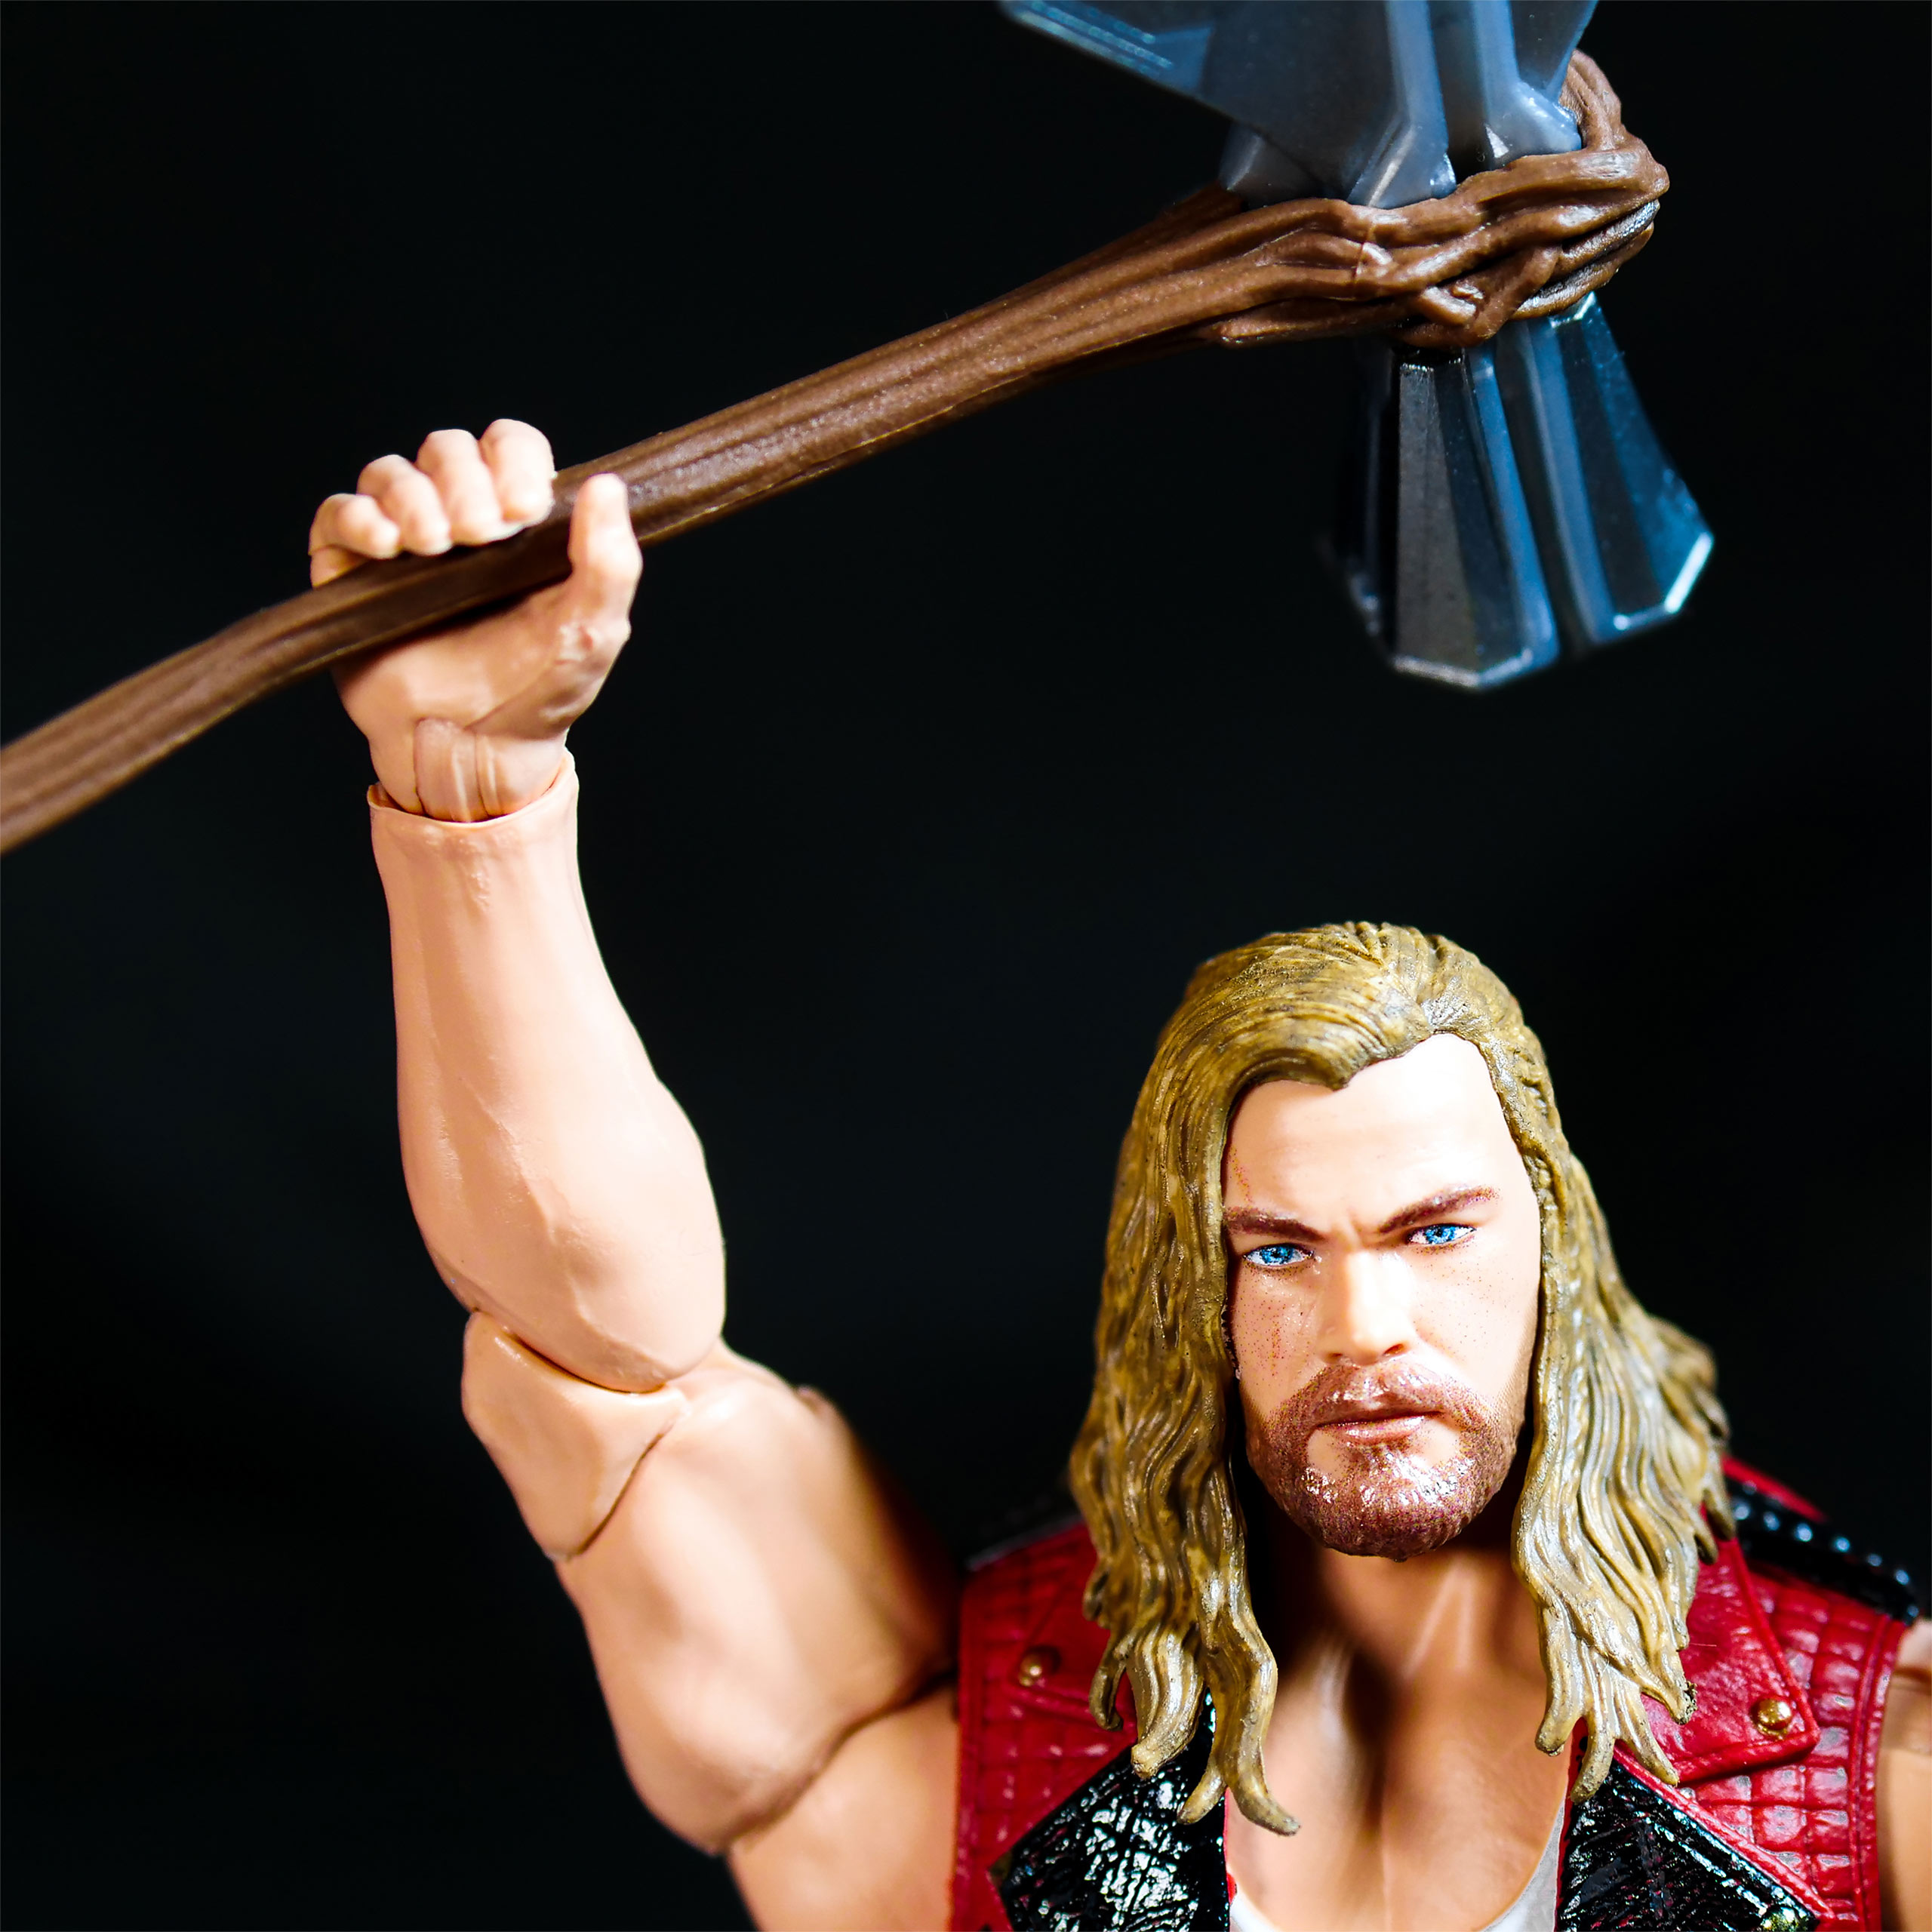 Thor: Love and Thunder - Ravager Thor Actionfigur